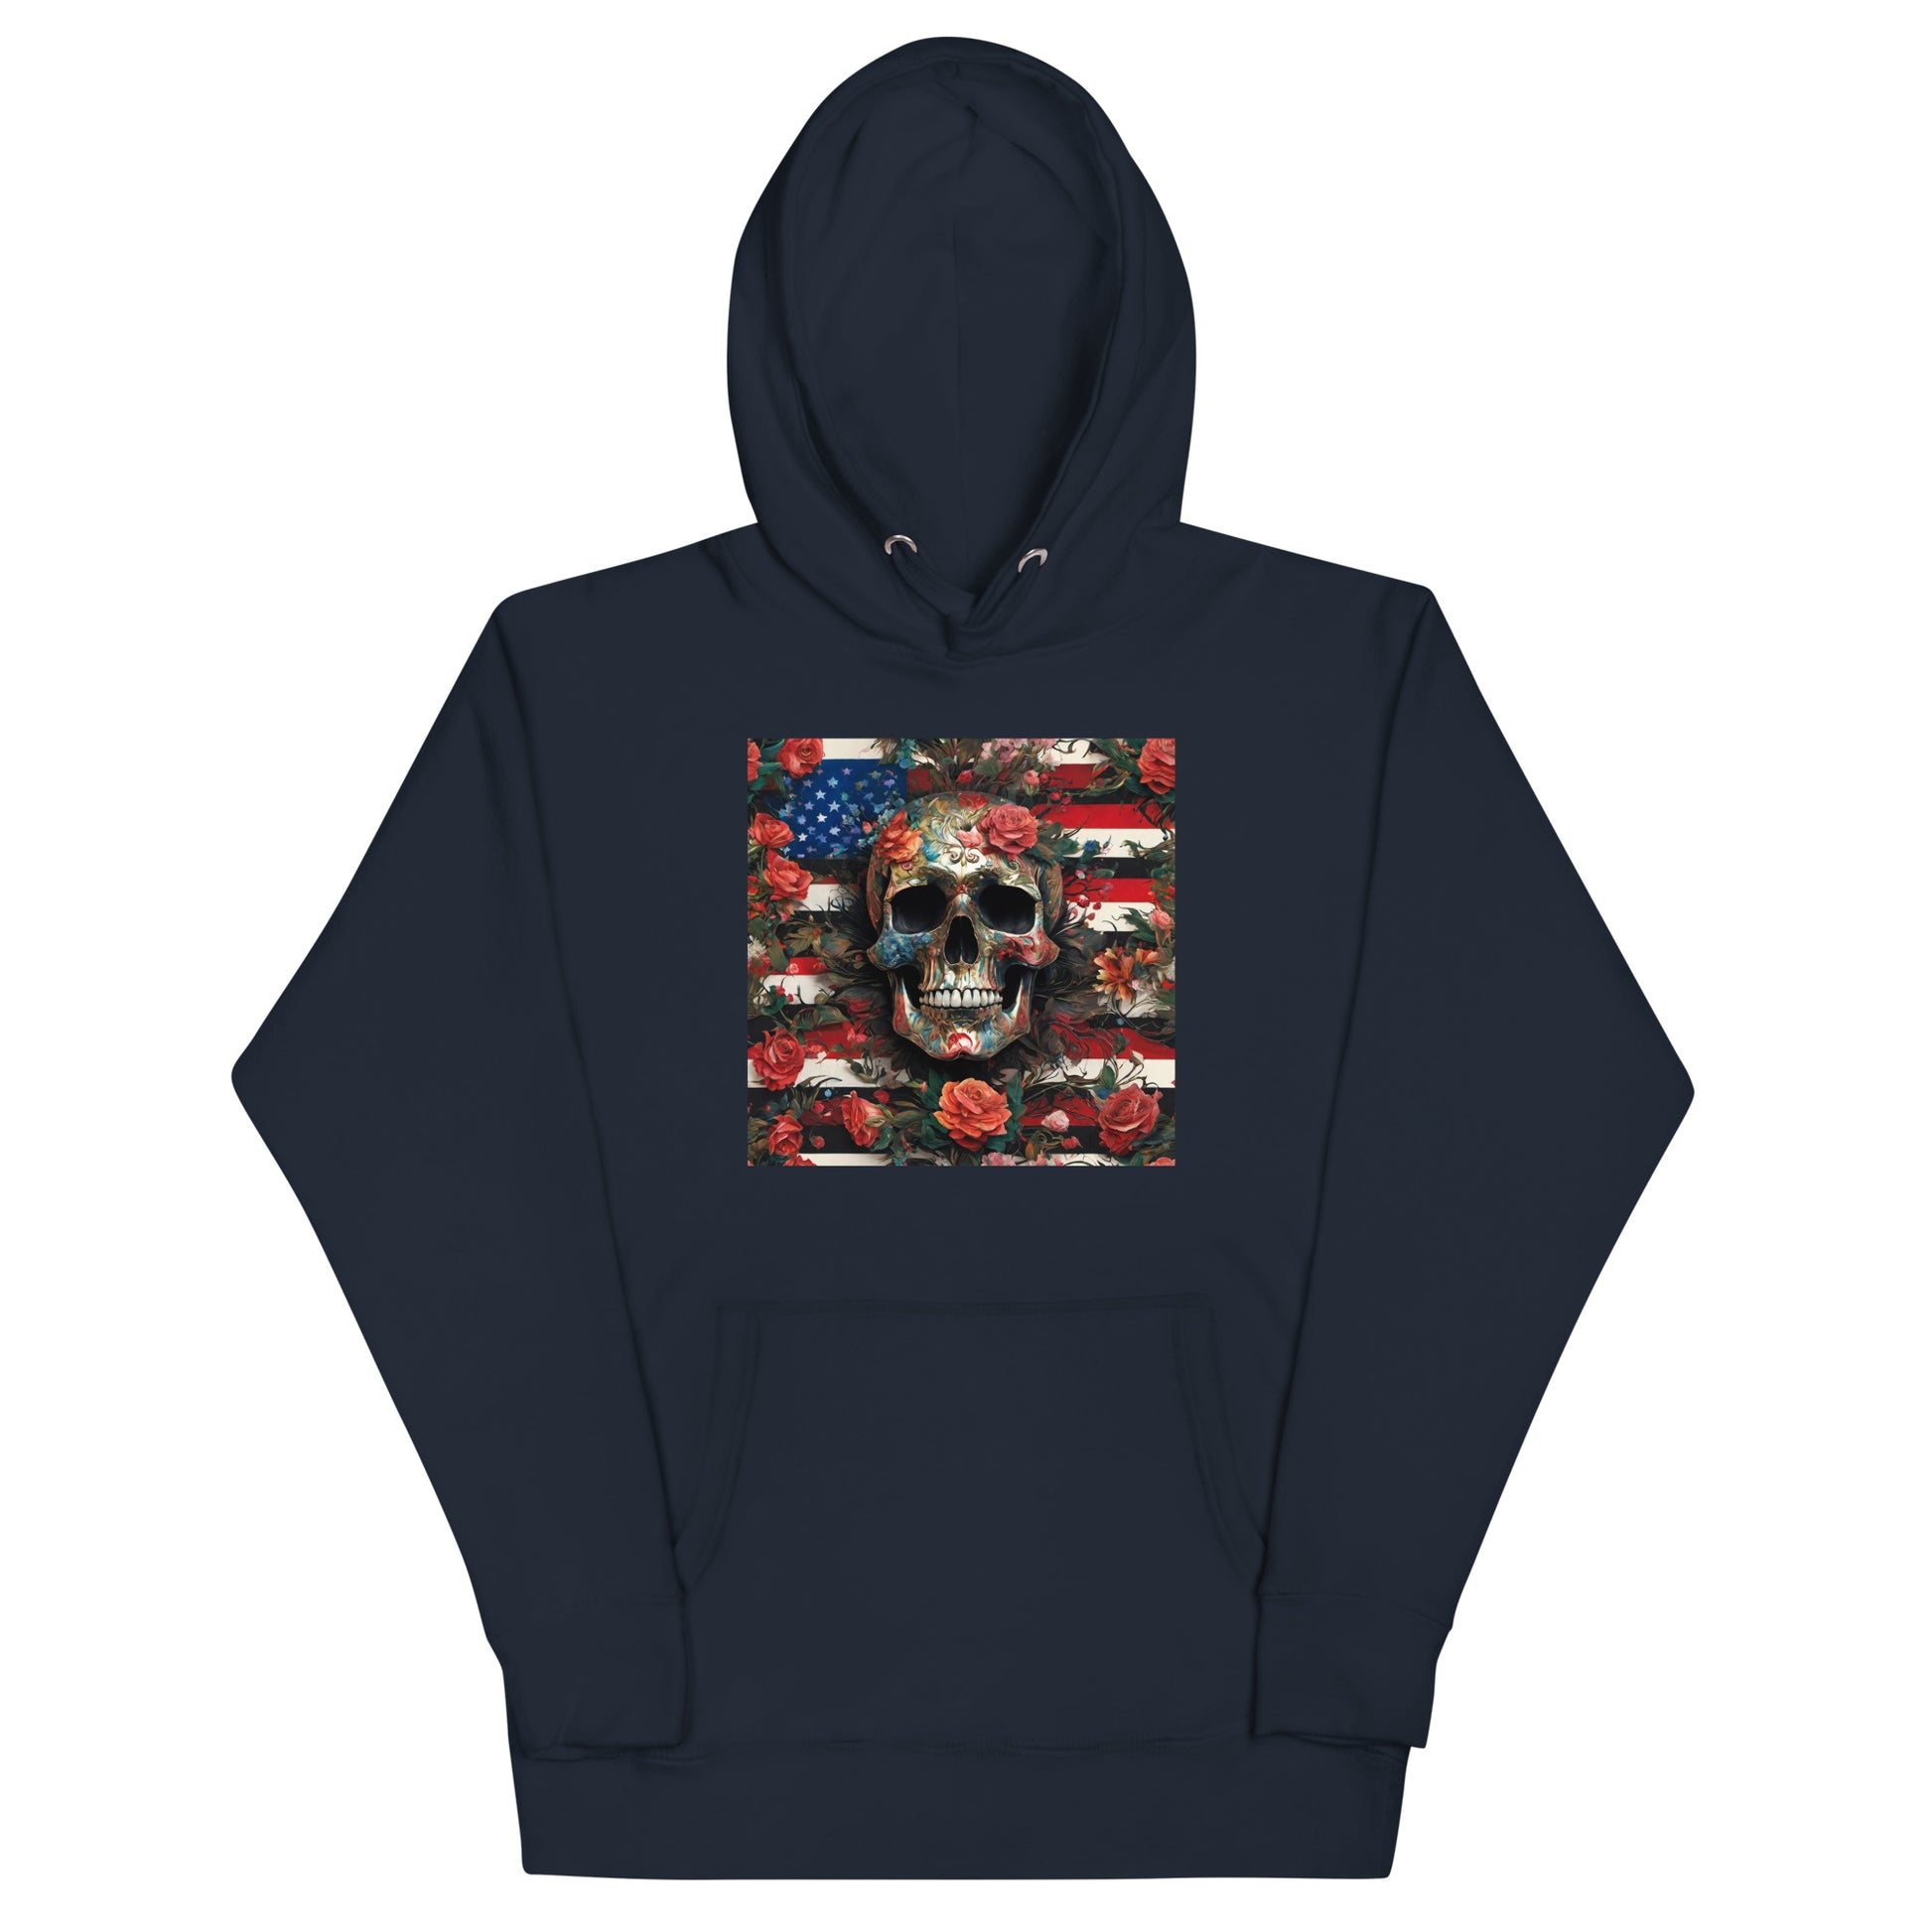 Skull, Roses, and Flag Graphic Hoodie Navy Blazer